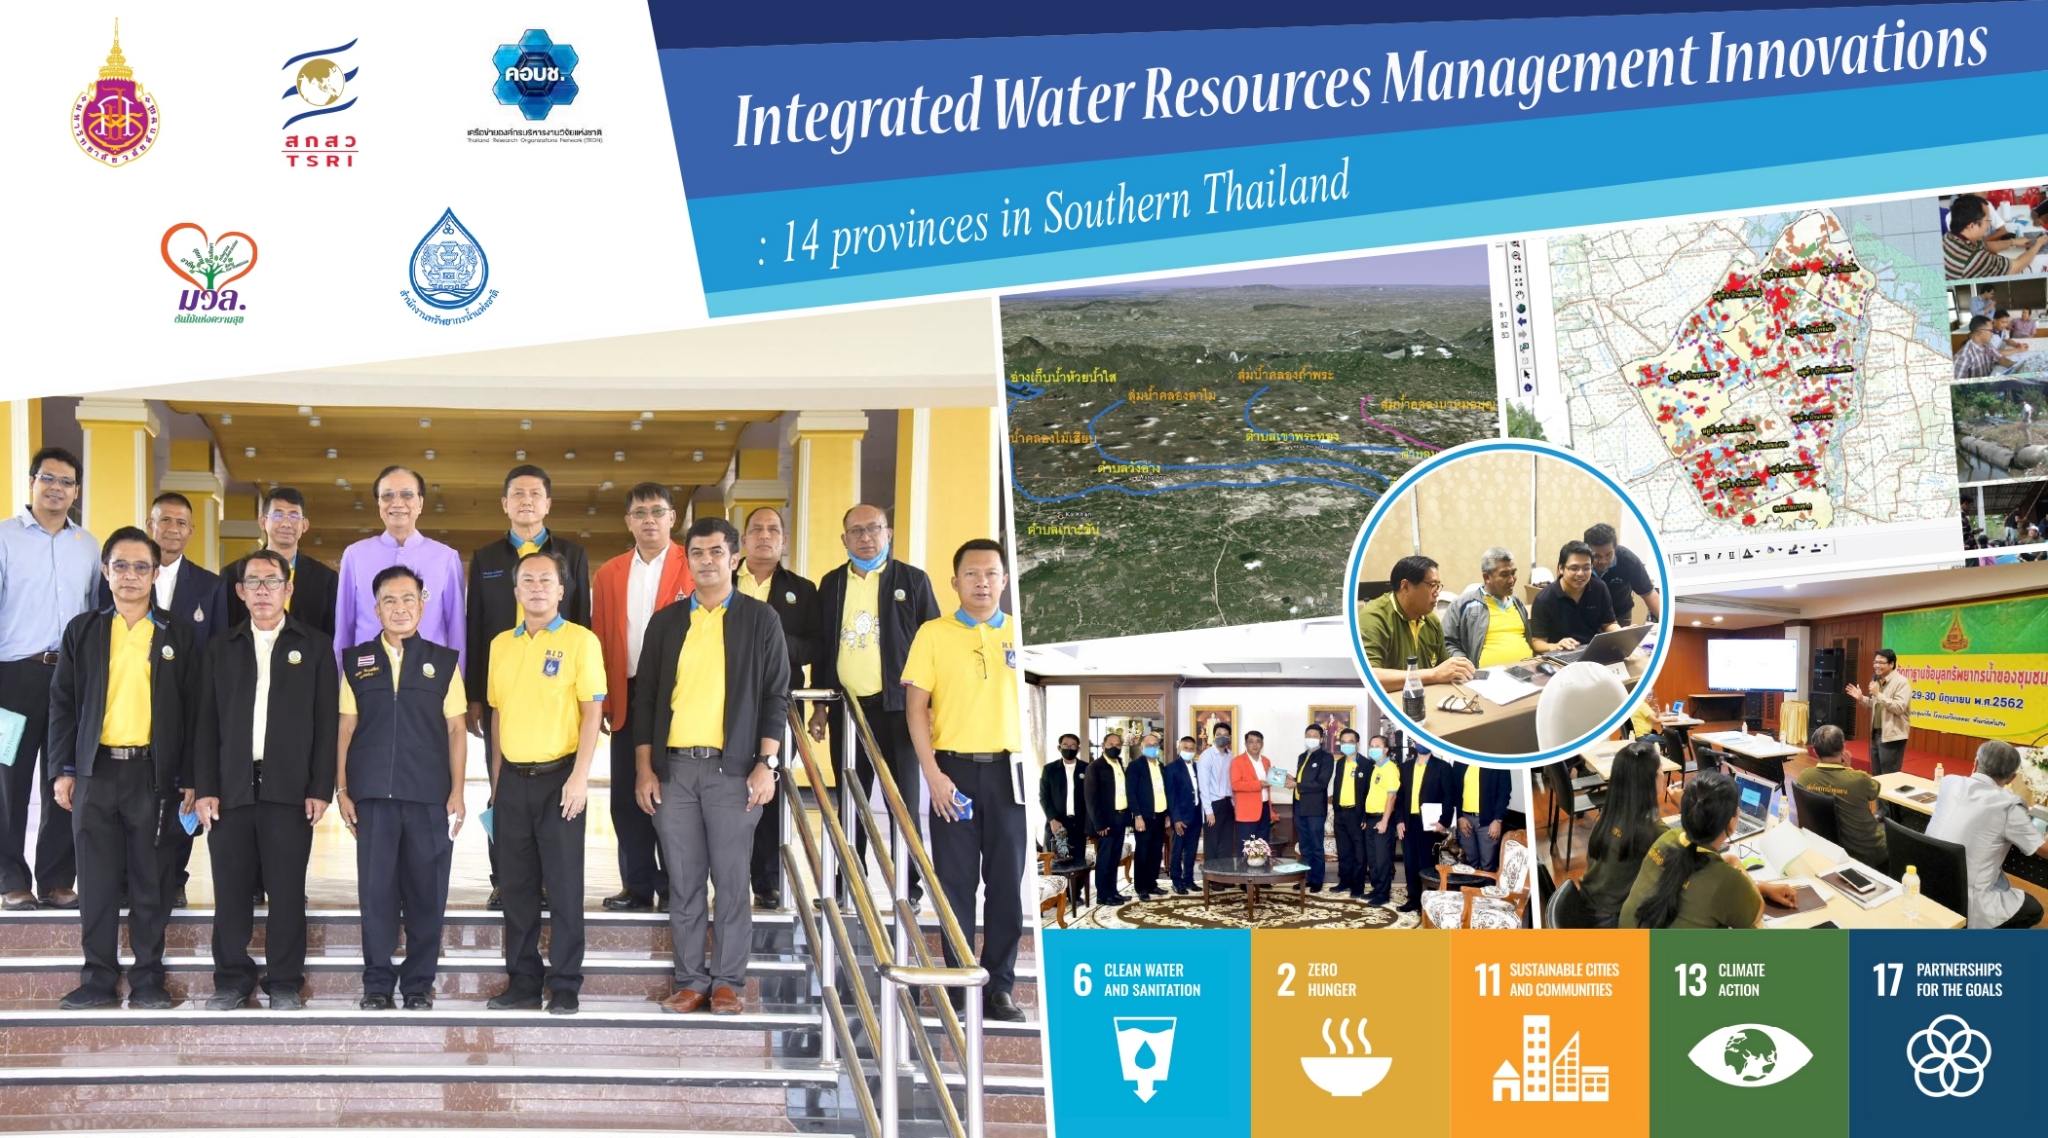 Integrated Water Resources Management Innovations: 14 provinces in Southern Thailand